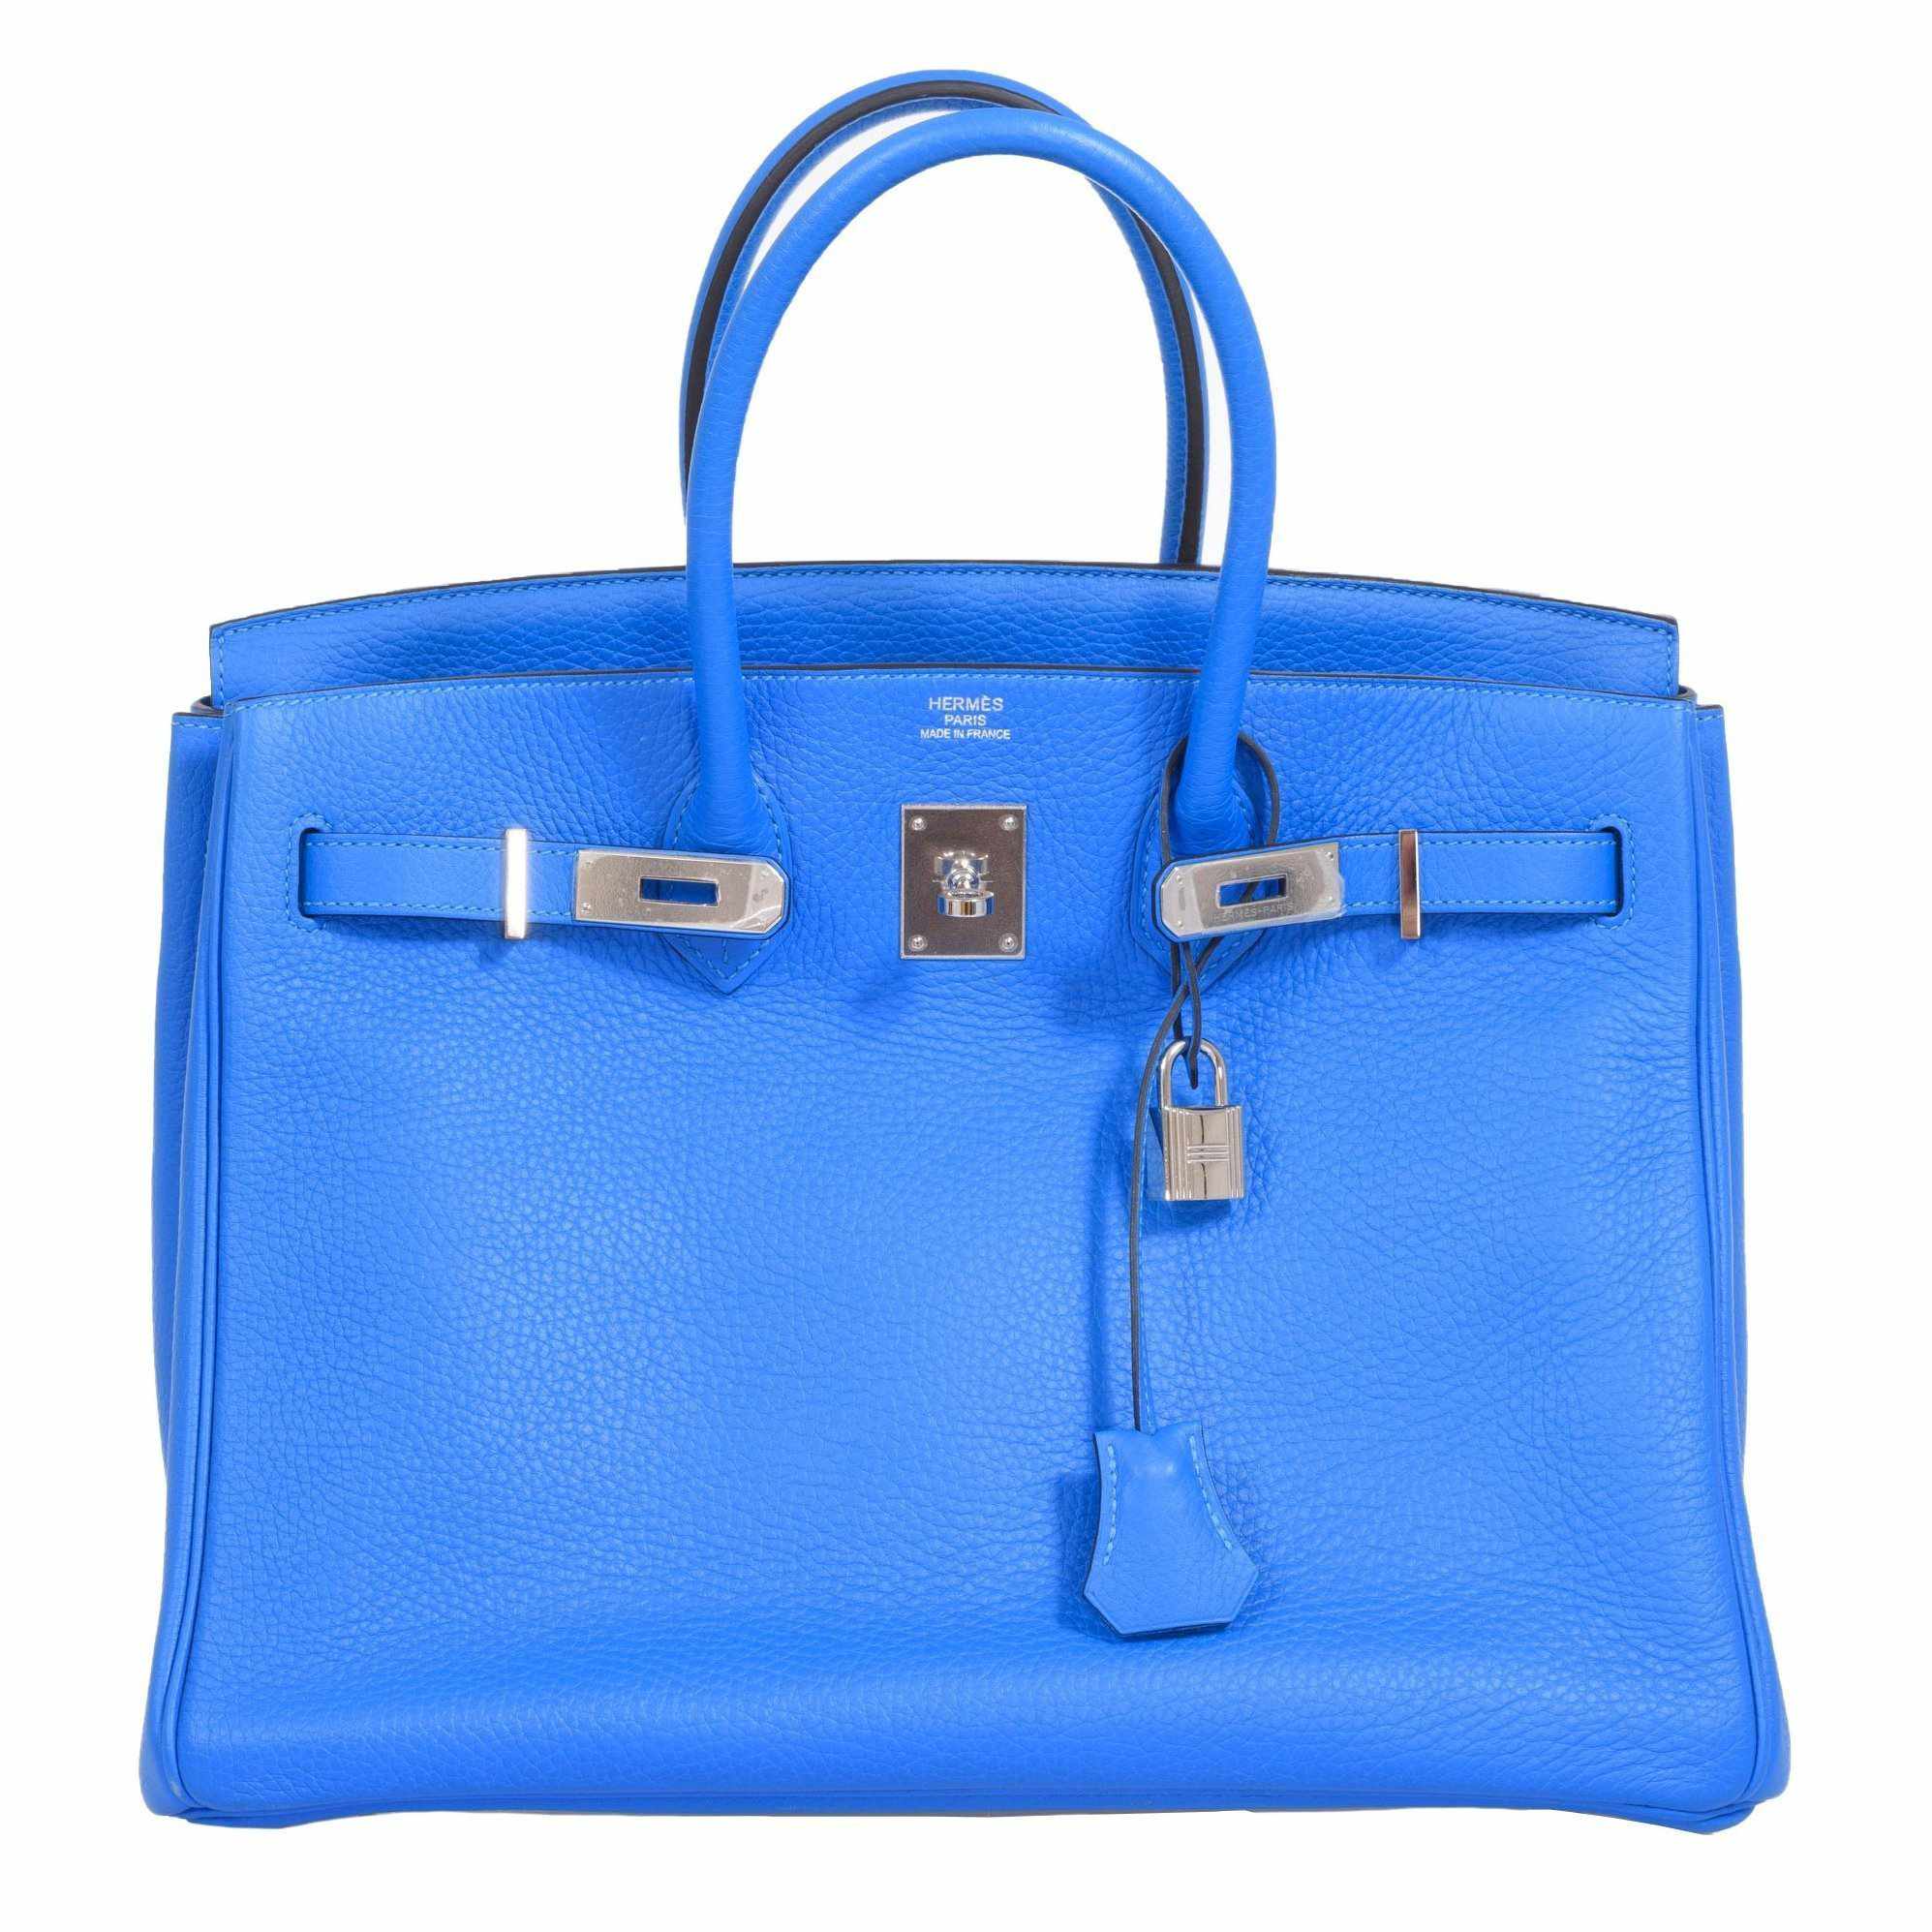 Hermes Birkin 35 Navy Blue Clemence Leather with Gold Hardware H